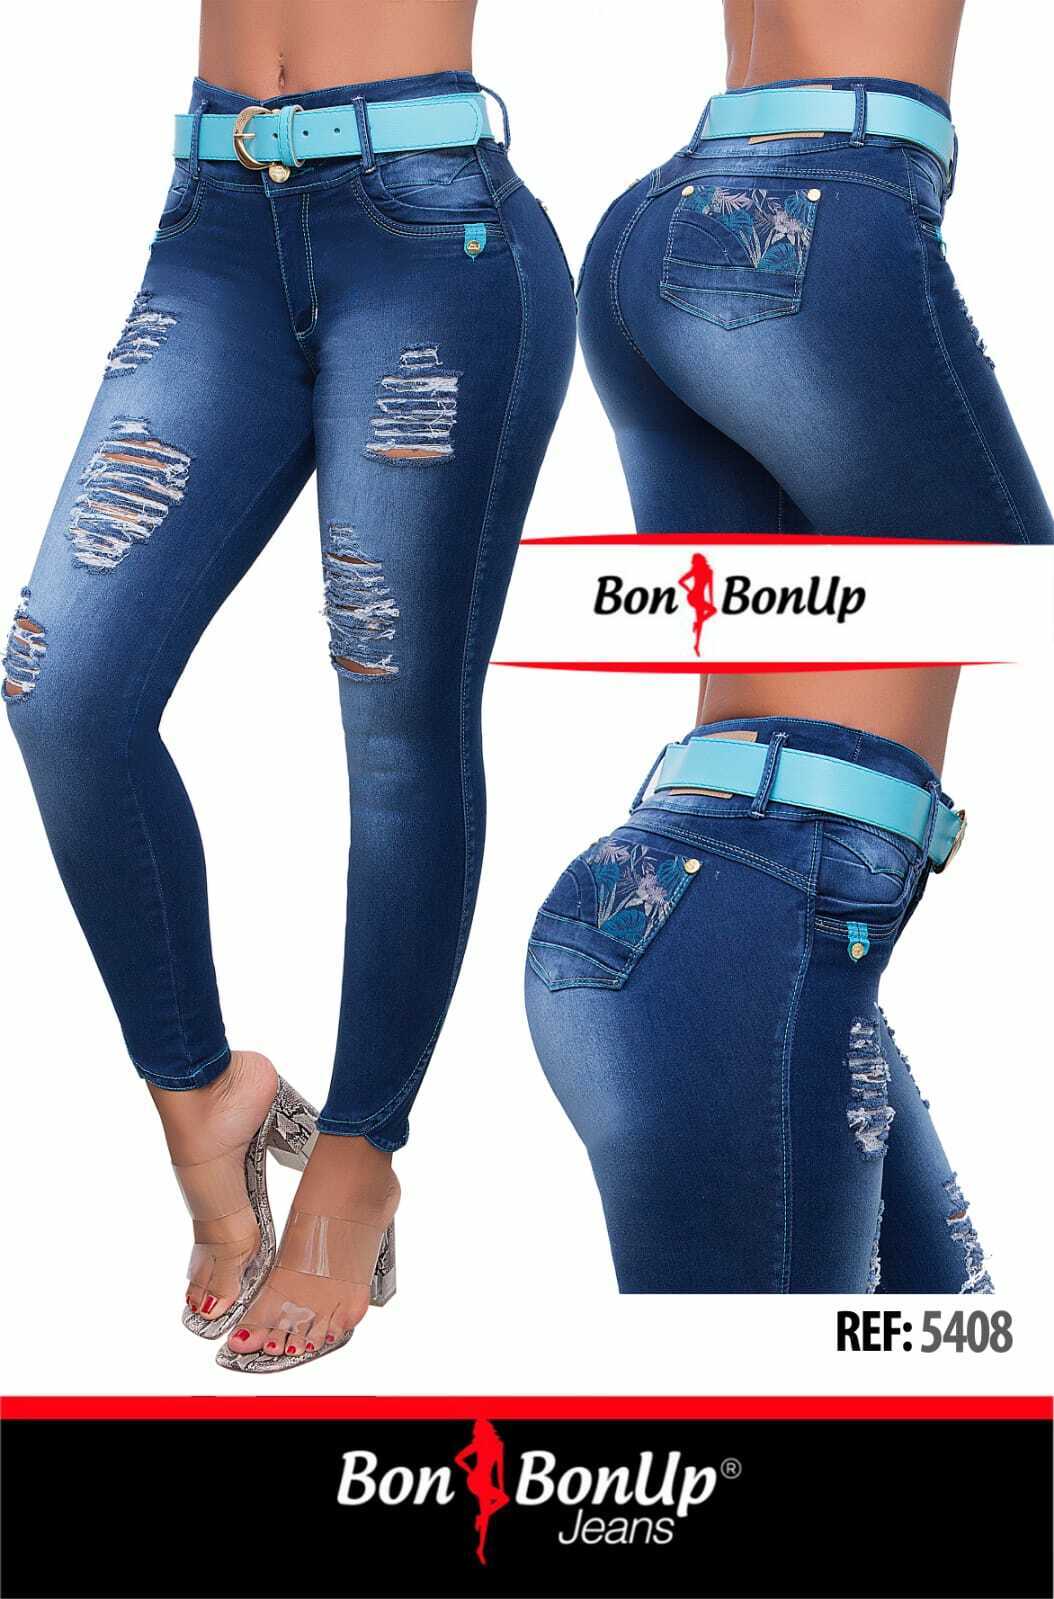 Jeans colombianos butt lifter fajas Bon Challenge the lowest price of Japan cola Free Shipping New levanta colombianas